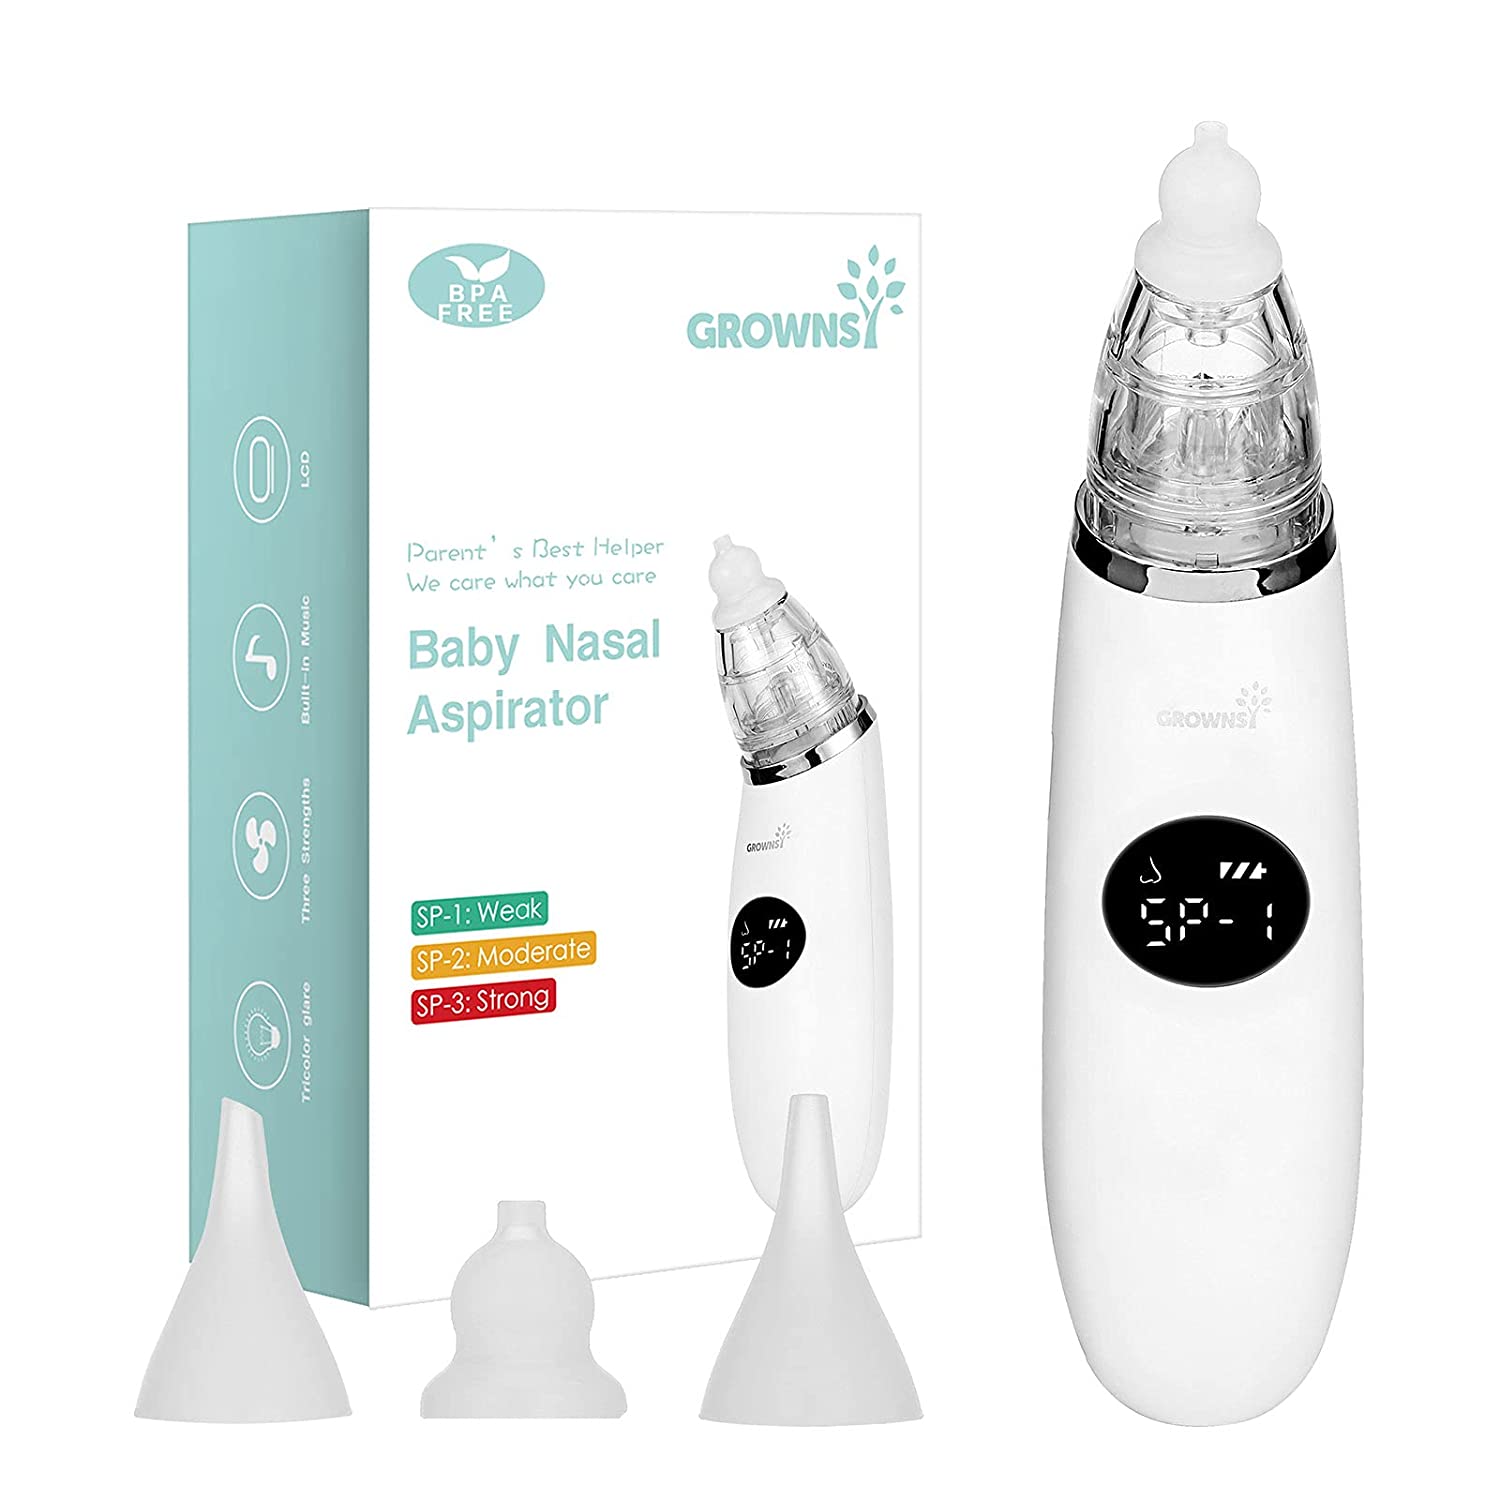 Infant nasal aspirator can reduce the risk of secondary diseases